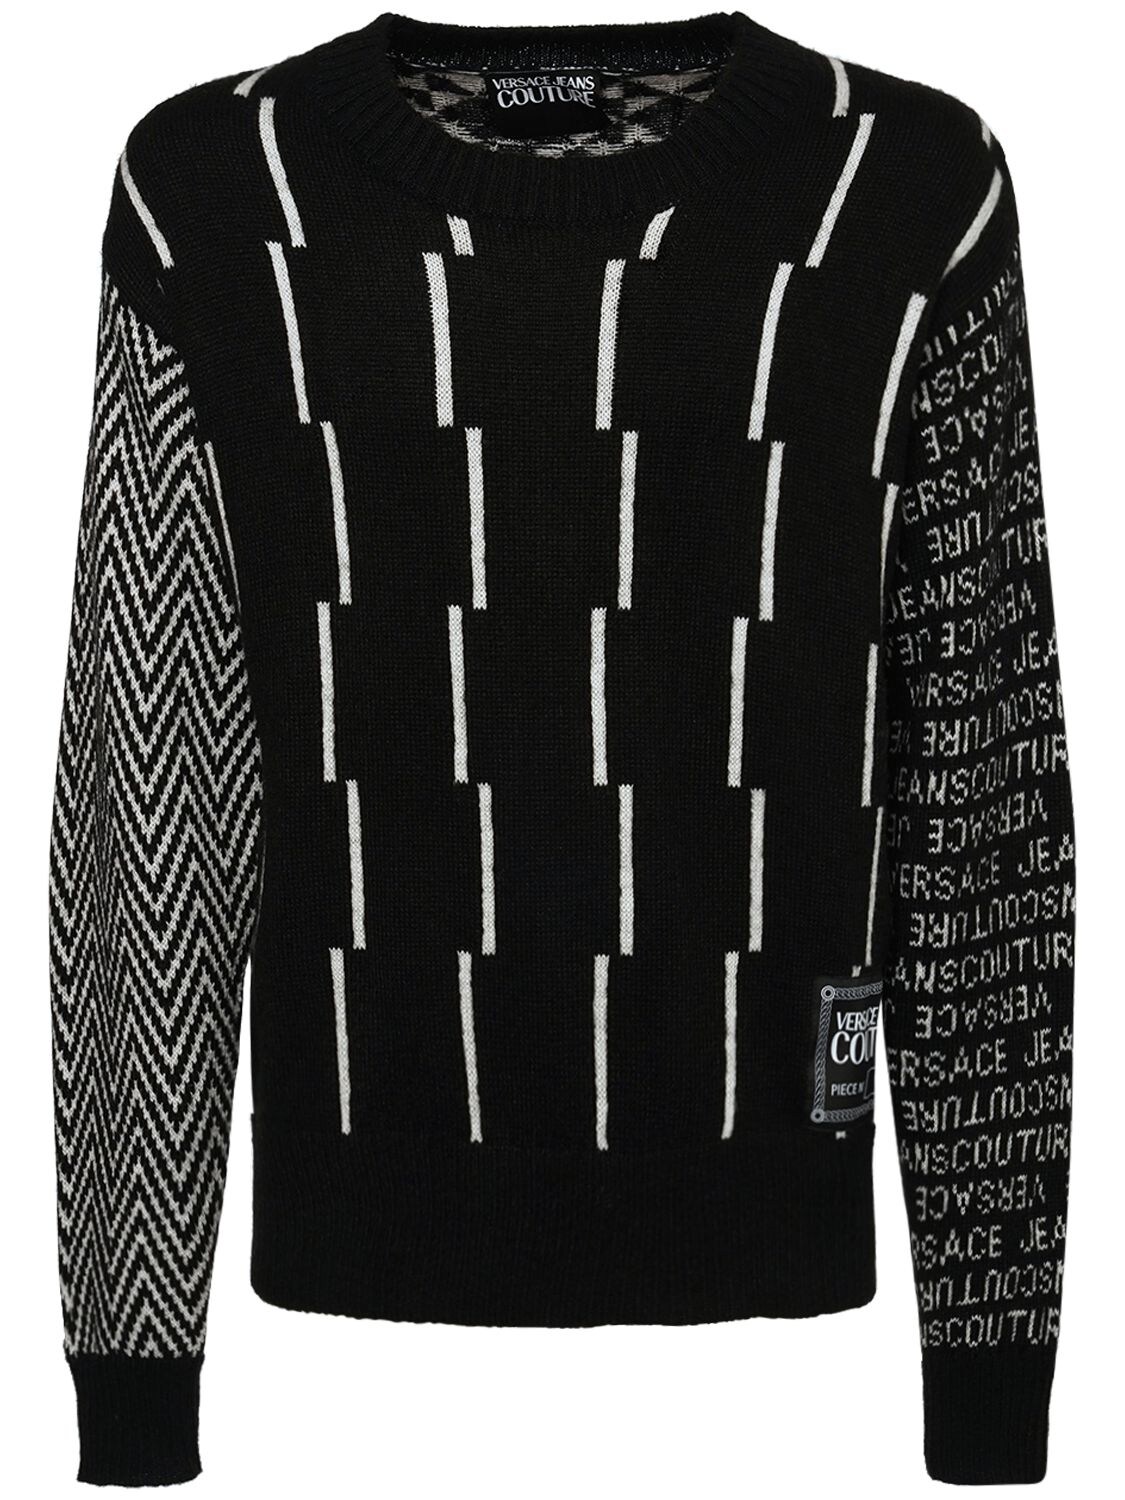 VERSACE JEANS COUTURE Graphic Print Mohair Blend Knit Sweater